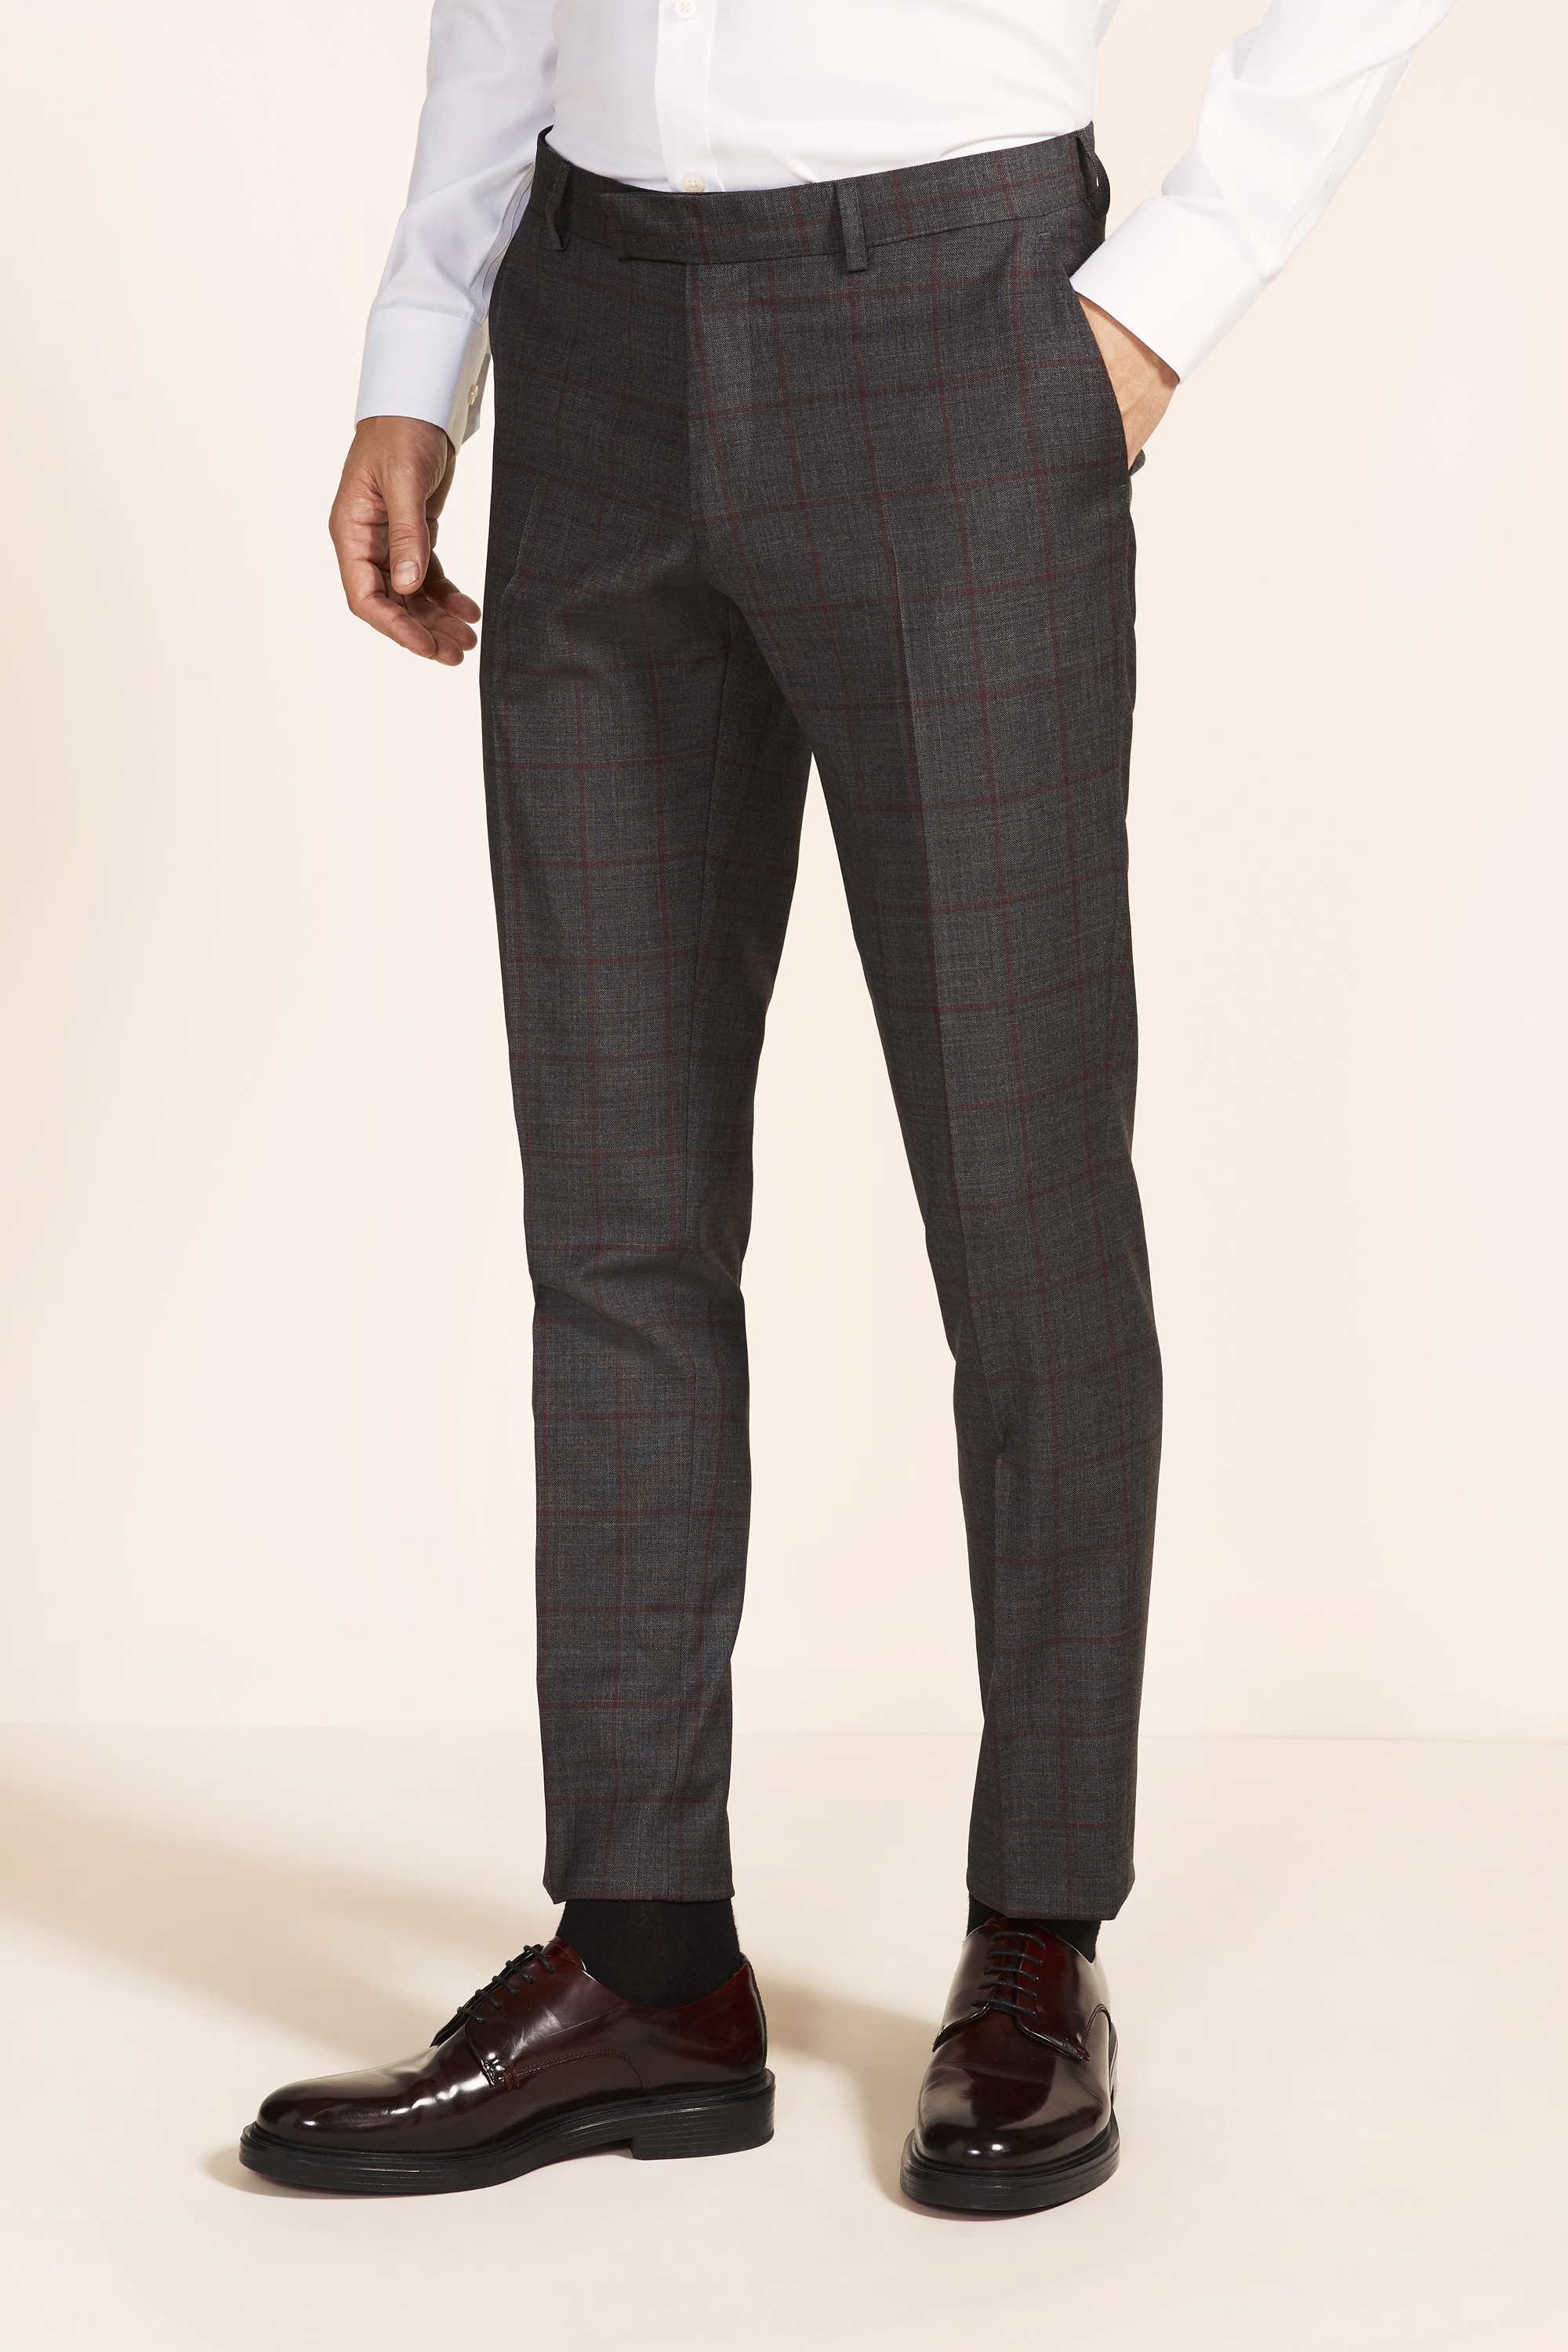 Moss 1851 Slim Fit Grey with Red Windowpane Supreme Stretch Trousers